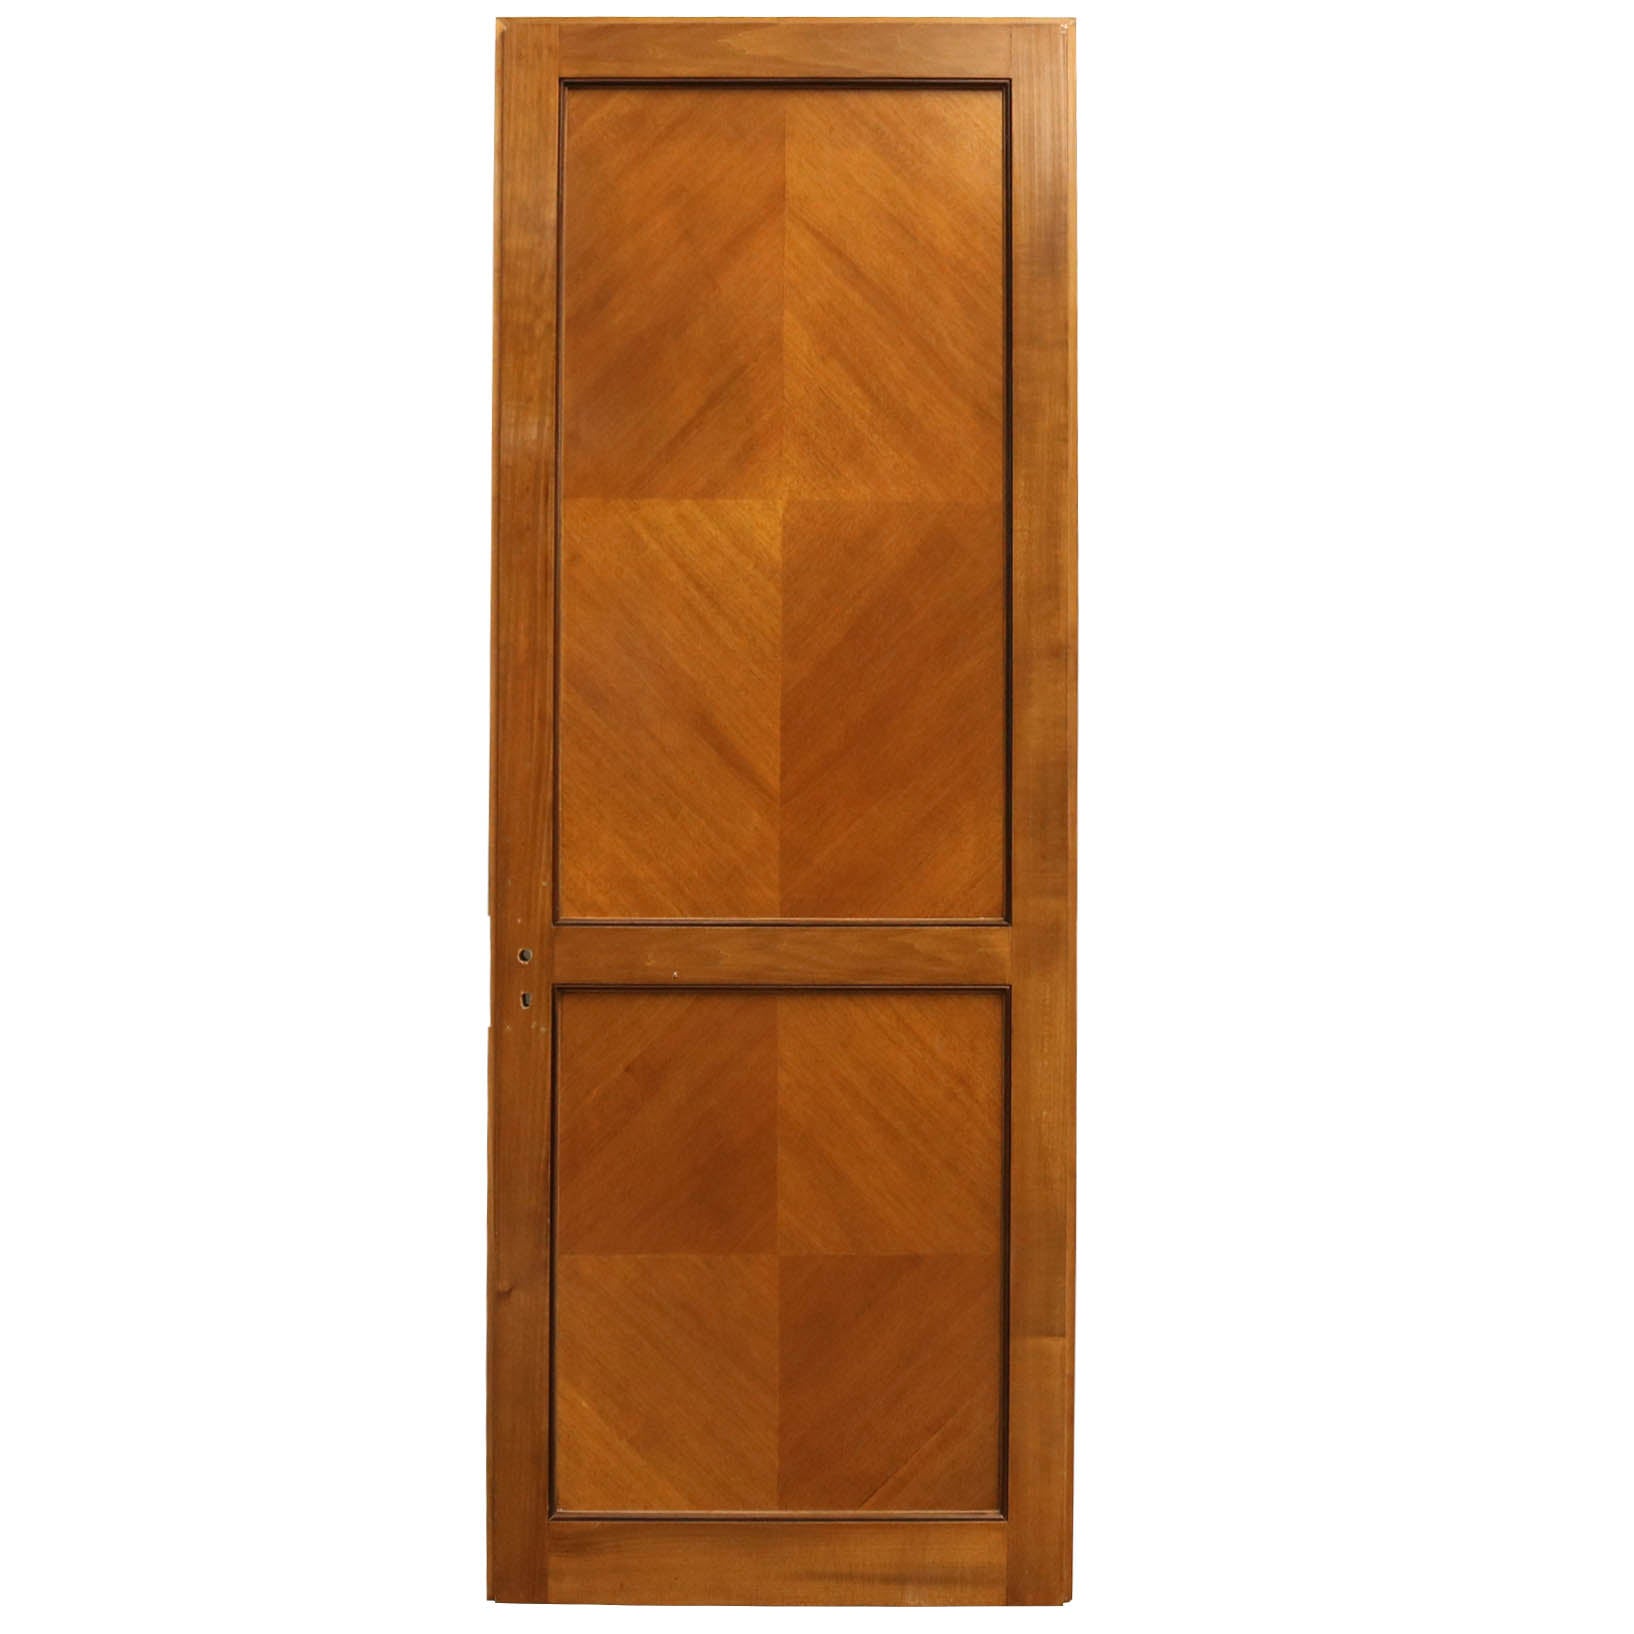 Reclaimed Solid Tulip Wood Two Panel Door - 222cm x 82.5cm | The Architectural Forum